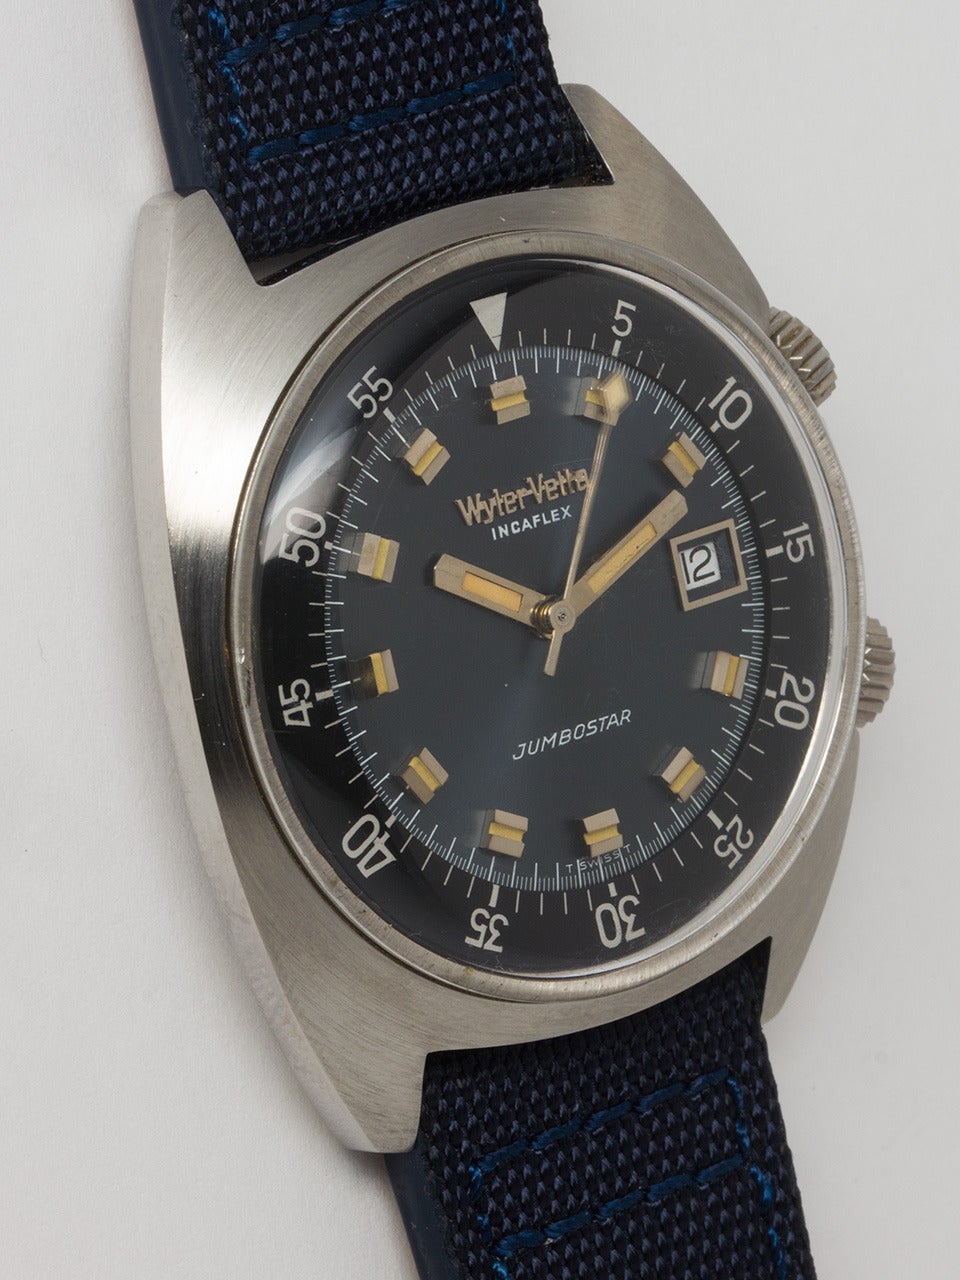 Wyler Vetta Stainless Steel Jumbostar Wristwatch circa 1970s. Massive oversize 42 X 50mm cushion style case super compressor. Featuring 2 signed recessed crowns, mint condition gray and black dial with applied distinctive silver indexes and large